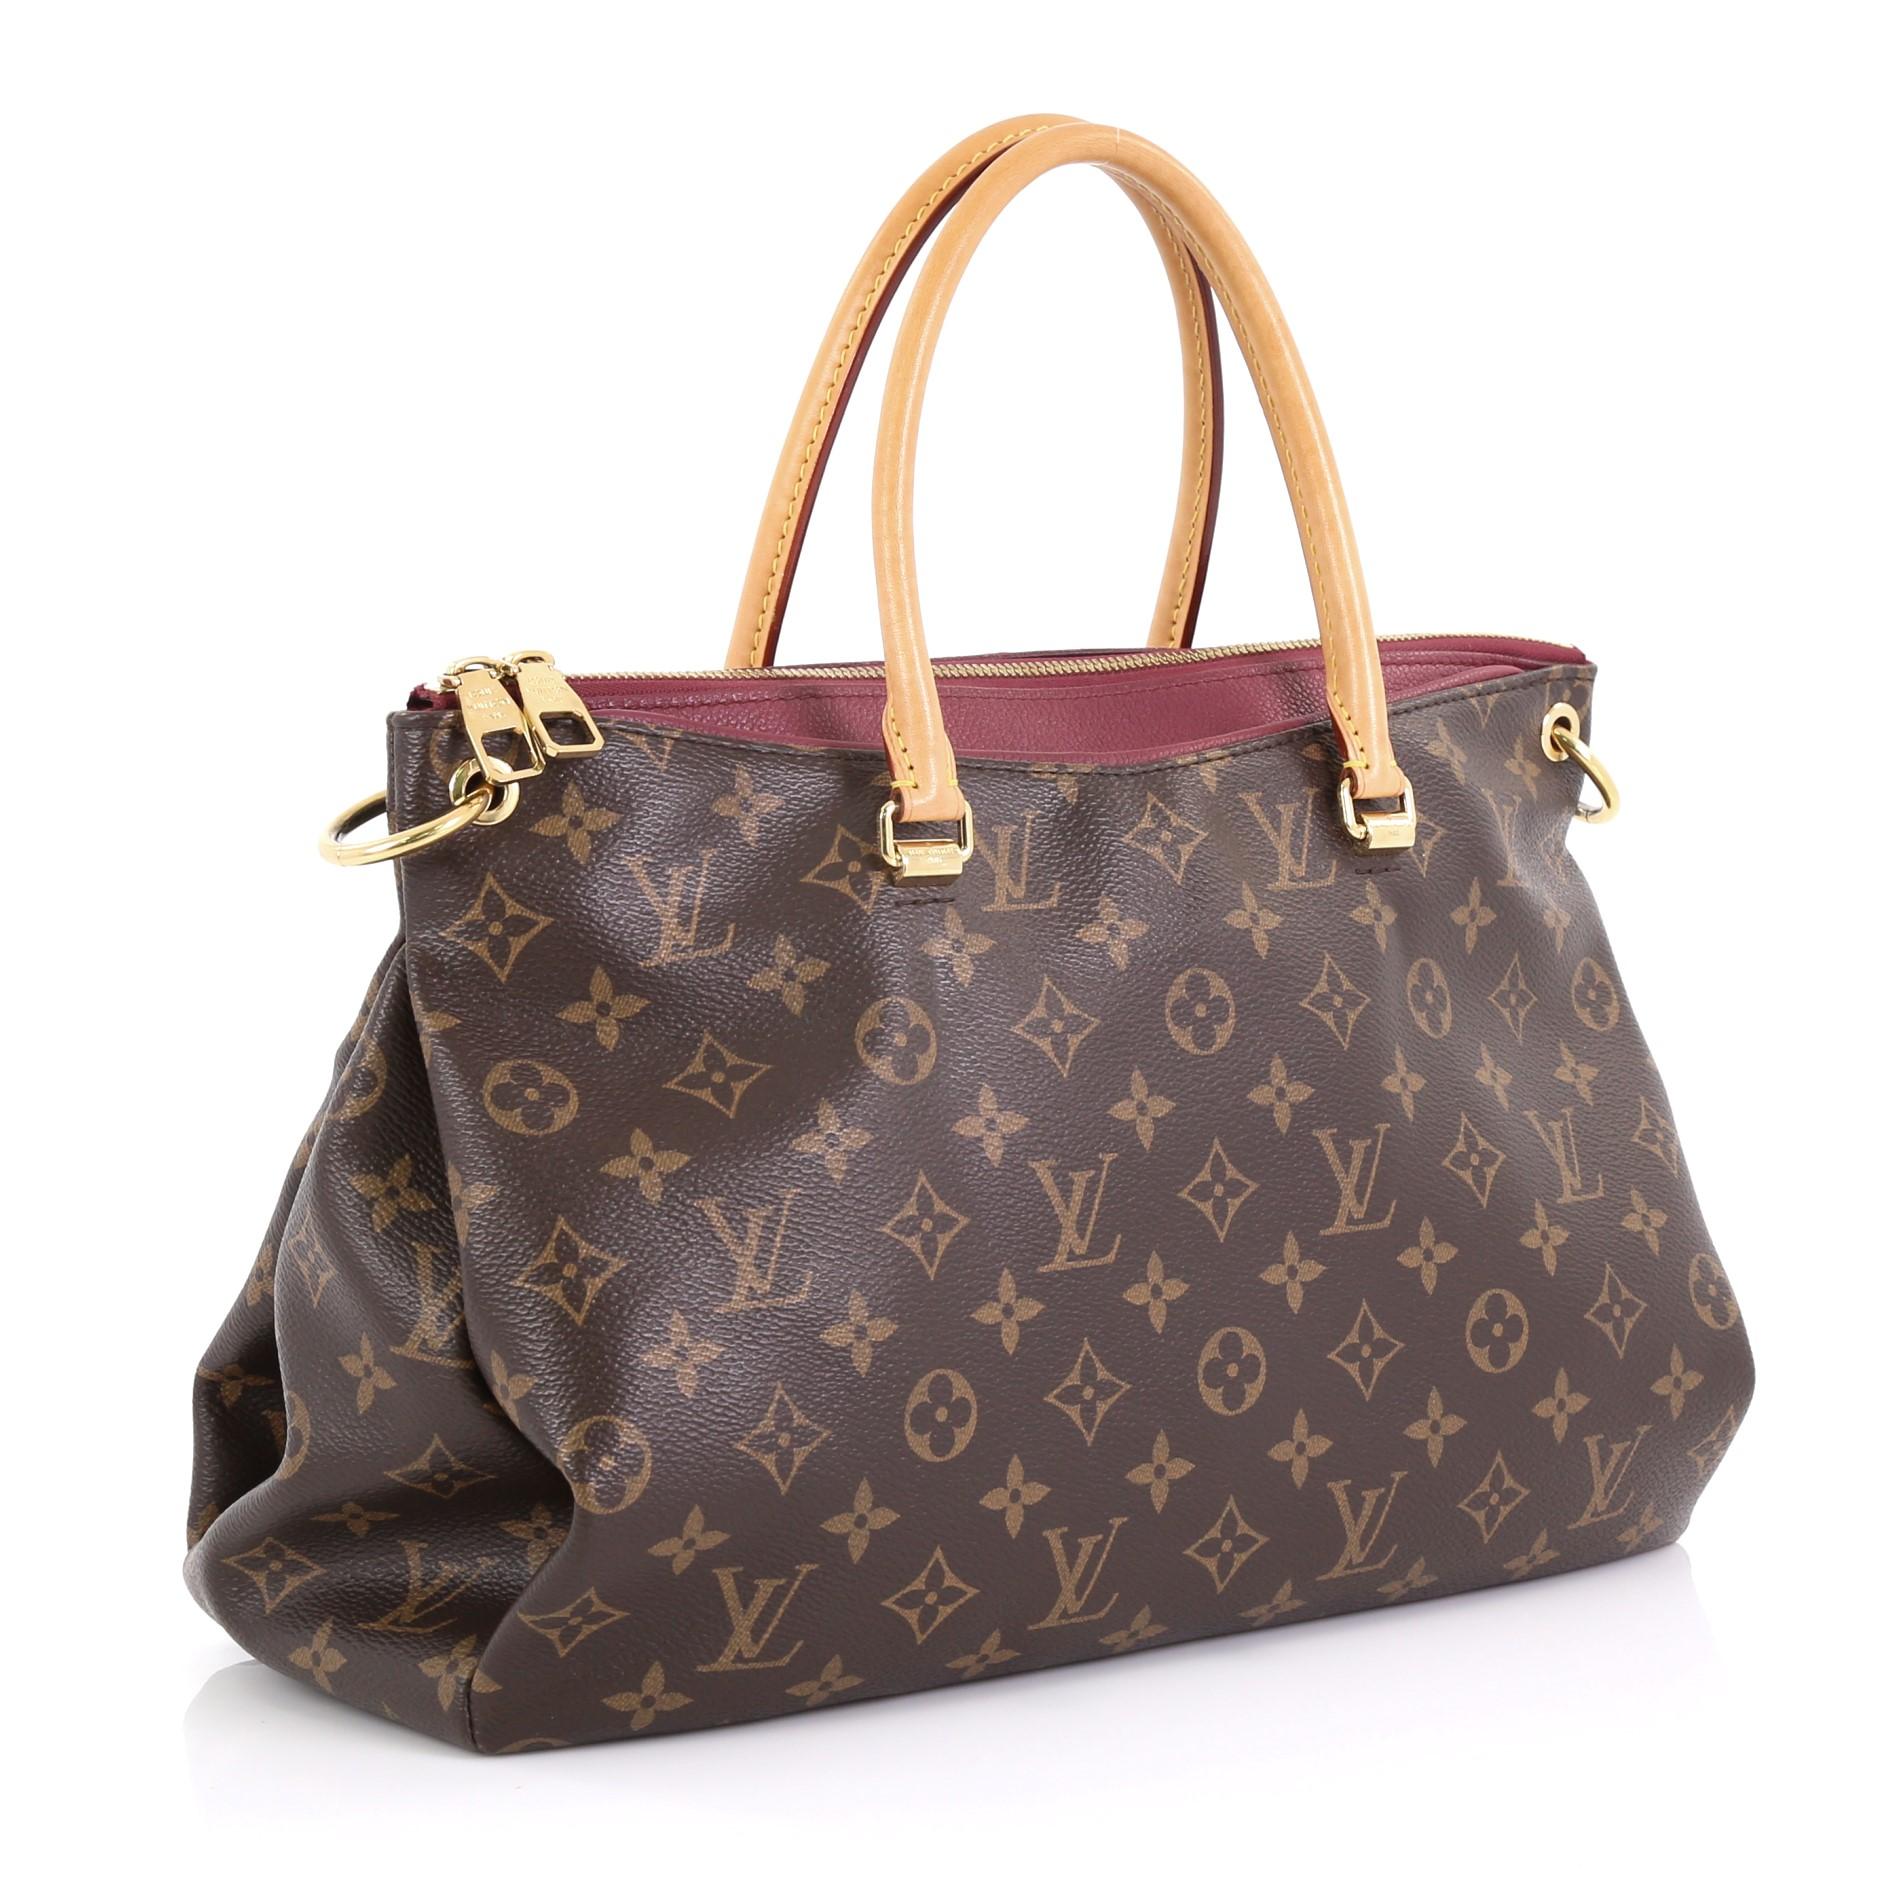 This Louis Vuitton Pallas Tote Monogram Canvas, crafted from brown monogram coated canvas and pink leather, features dual rolled handles, protective base studs, and gold-tone hardware. Its two-way zip closure opens to a burgundy microfiber interior